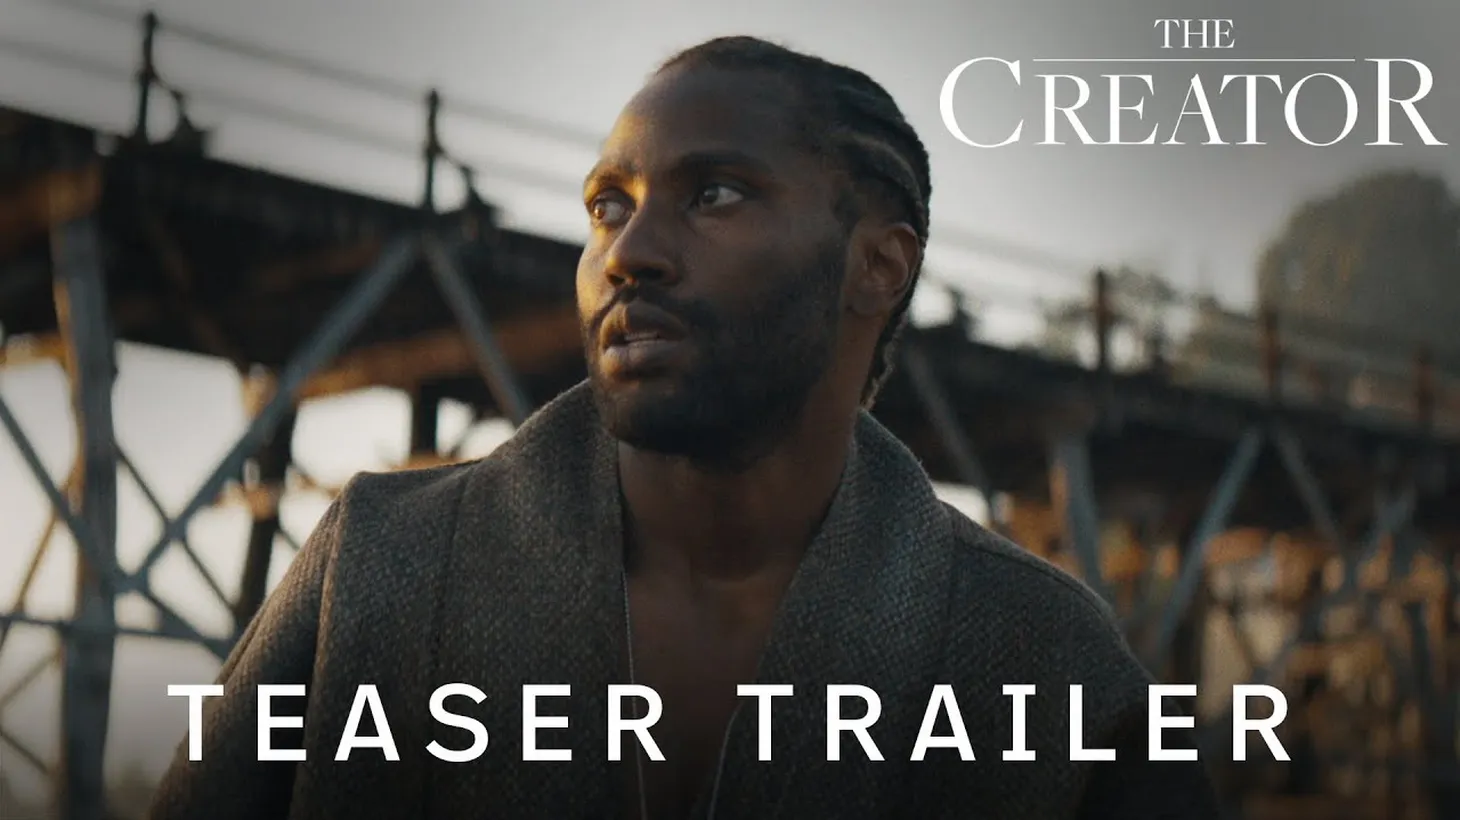 In The Creator, John David Washington plays a former special agent who hunts down the creator of a super-advanced AI.